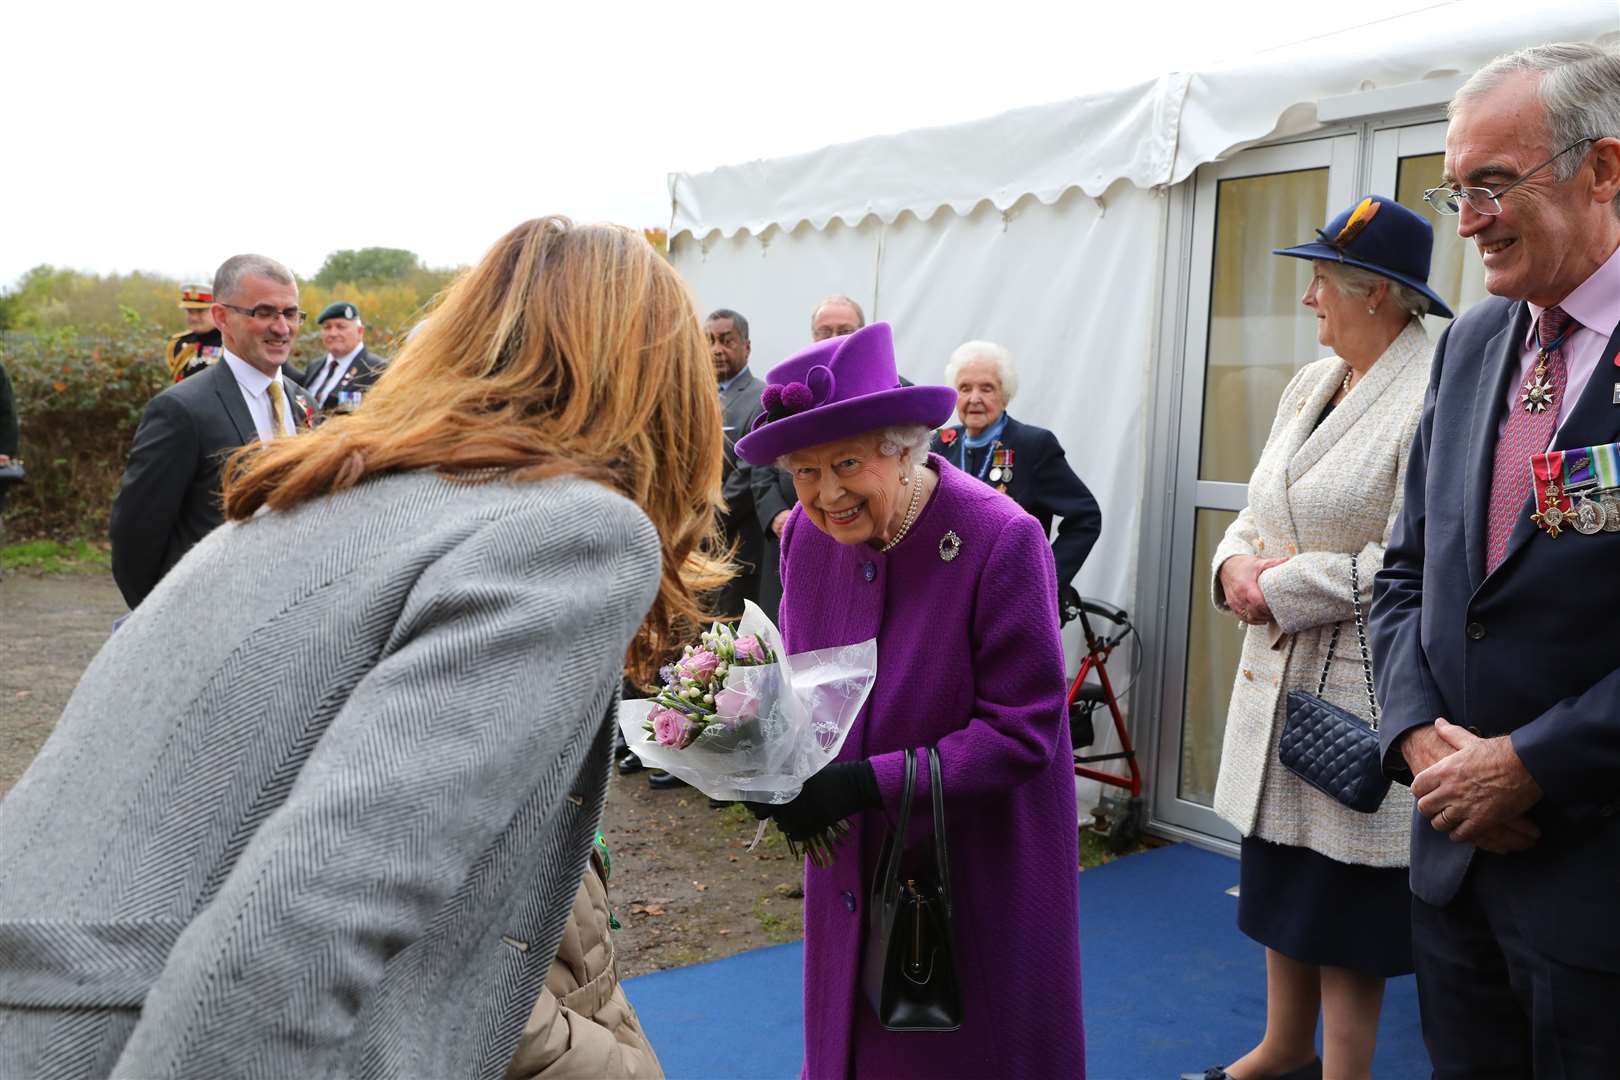 Her Majesty received flowers before she left. Picture: Matt Walker